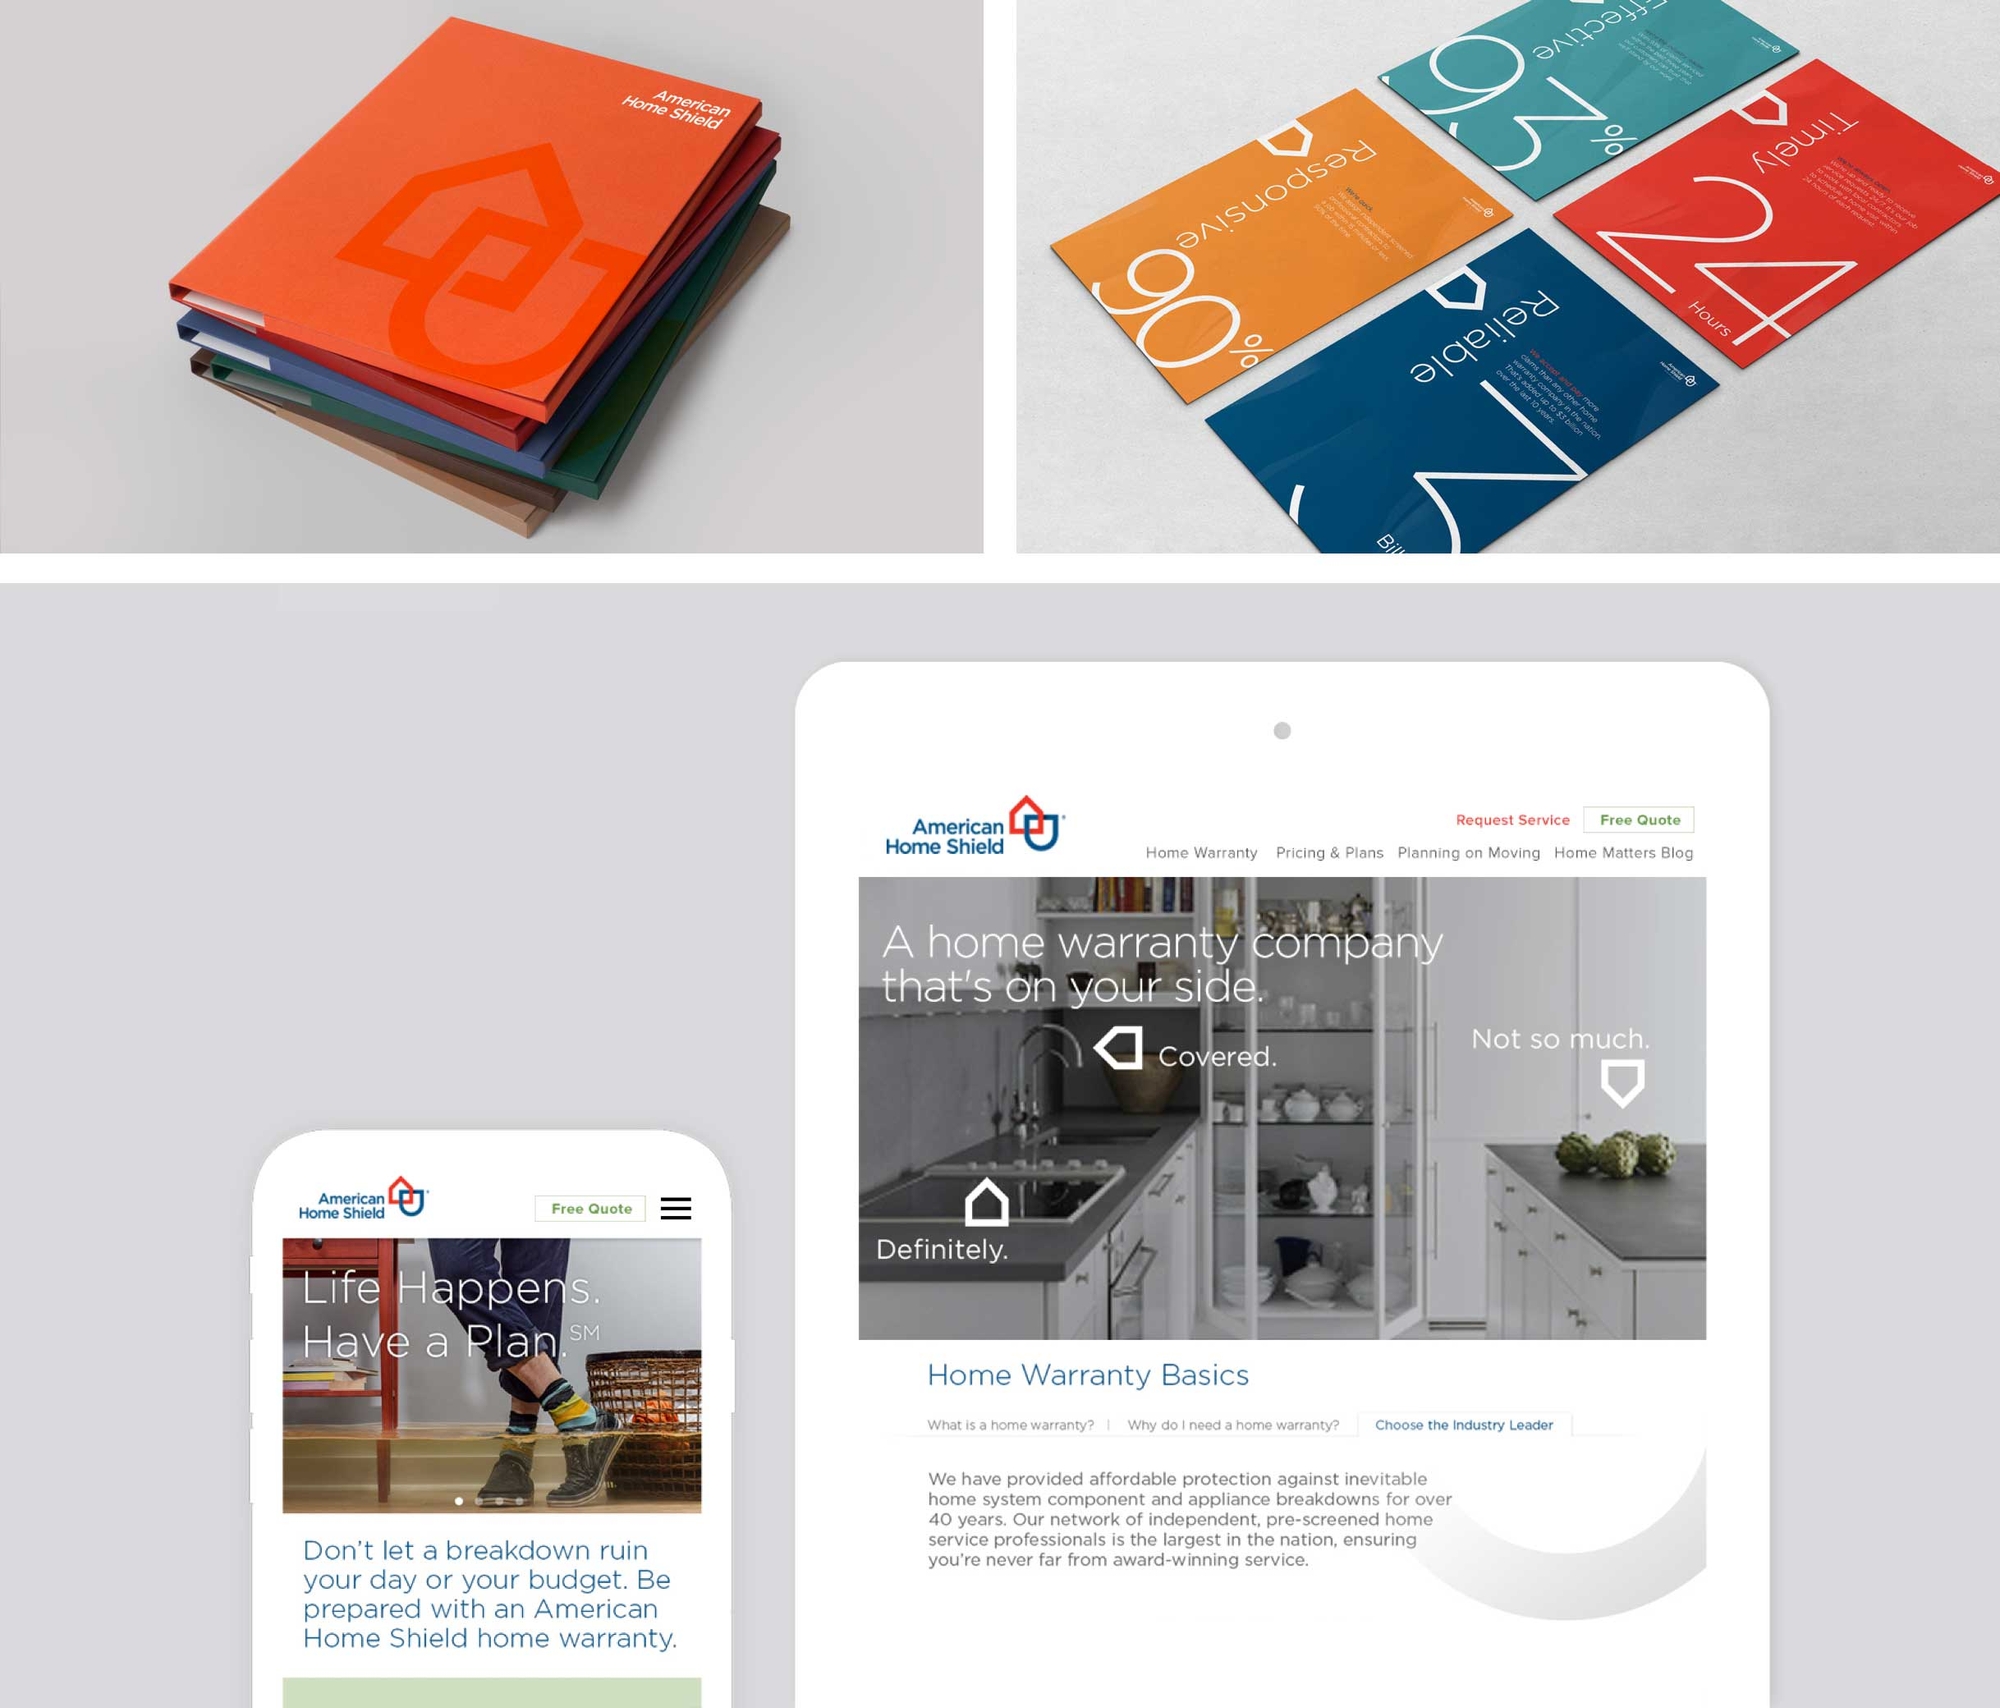 American Home Shield brand collateral - photographic stills of point of sale materials in various brand colors and mobile and tablet website stills